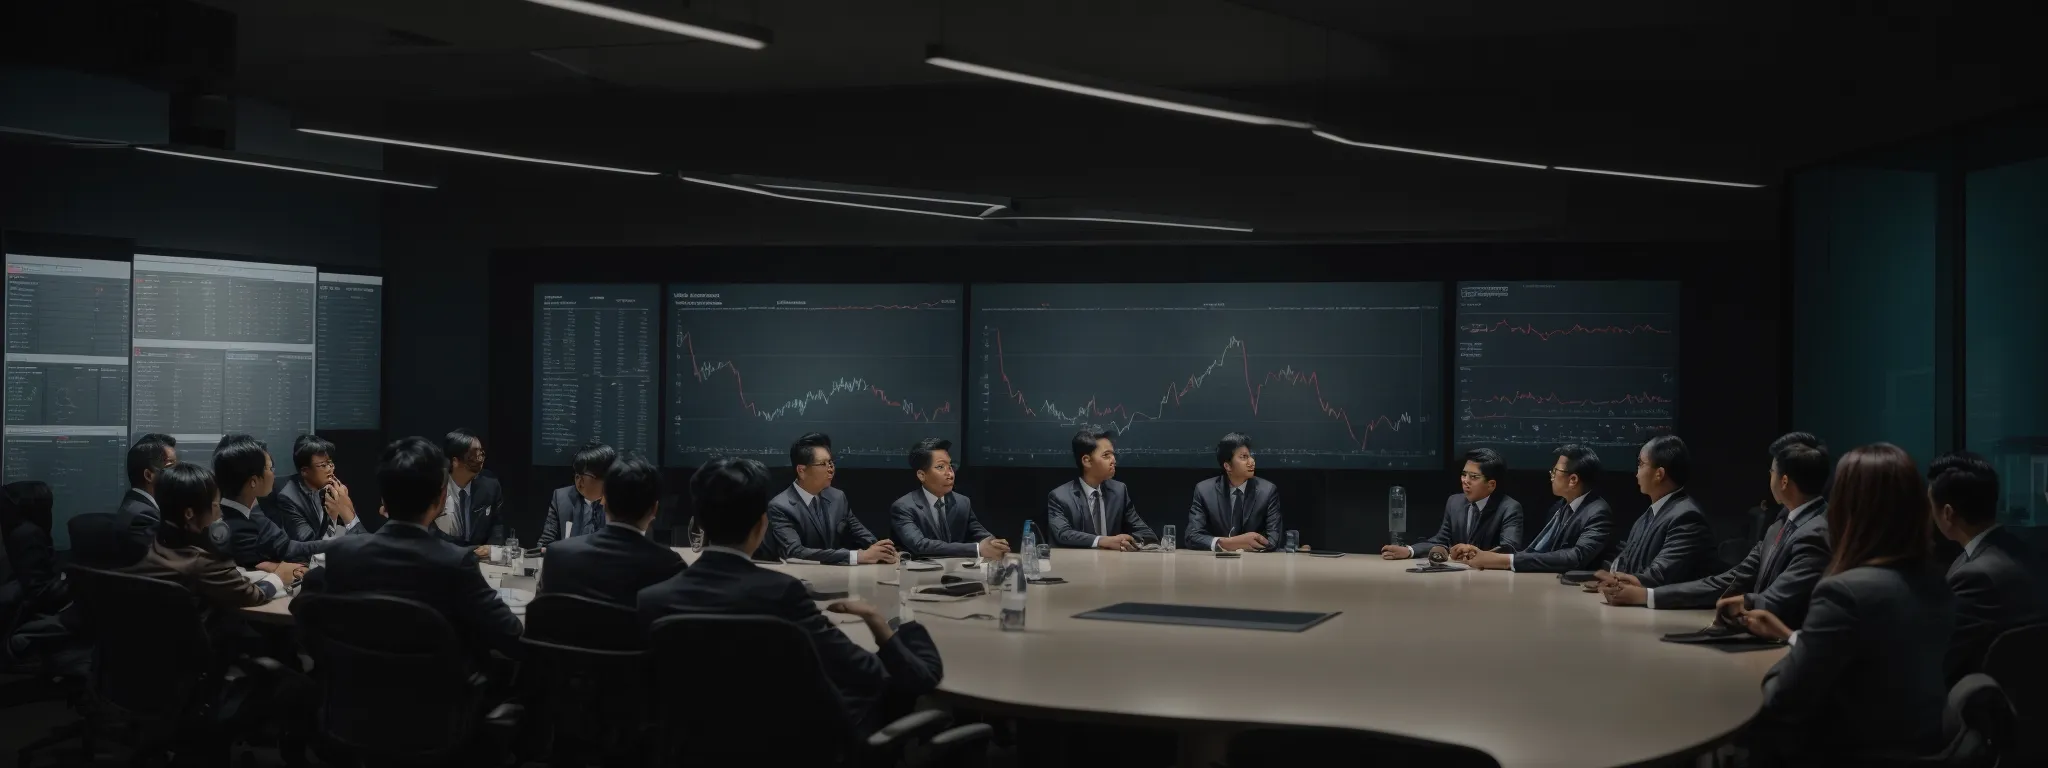 a team gathered around a conference table with a large screen displaying a graph showing upward growth.